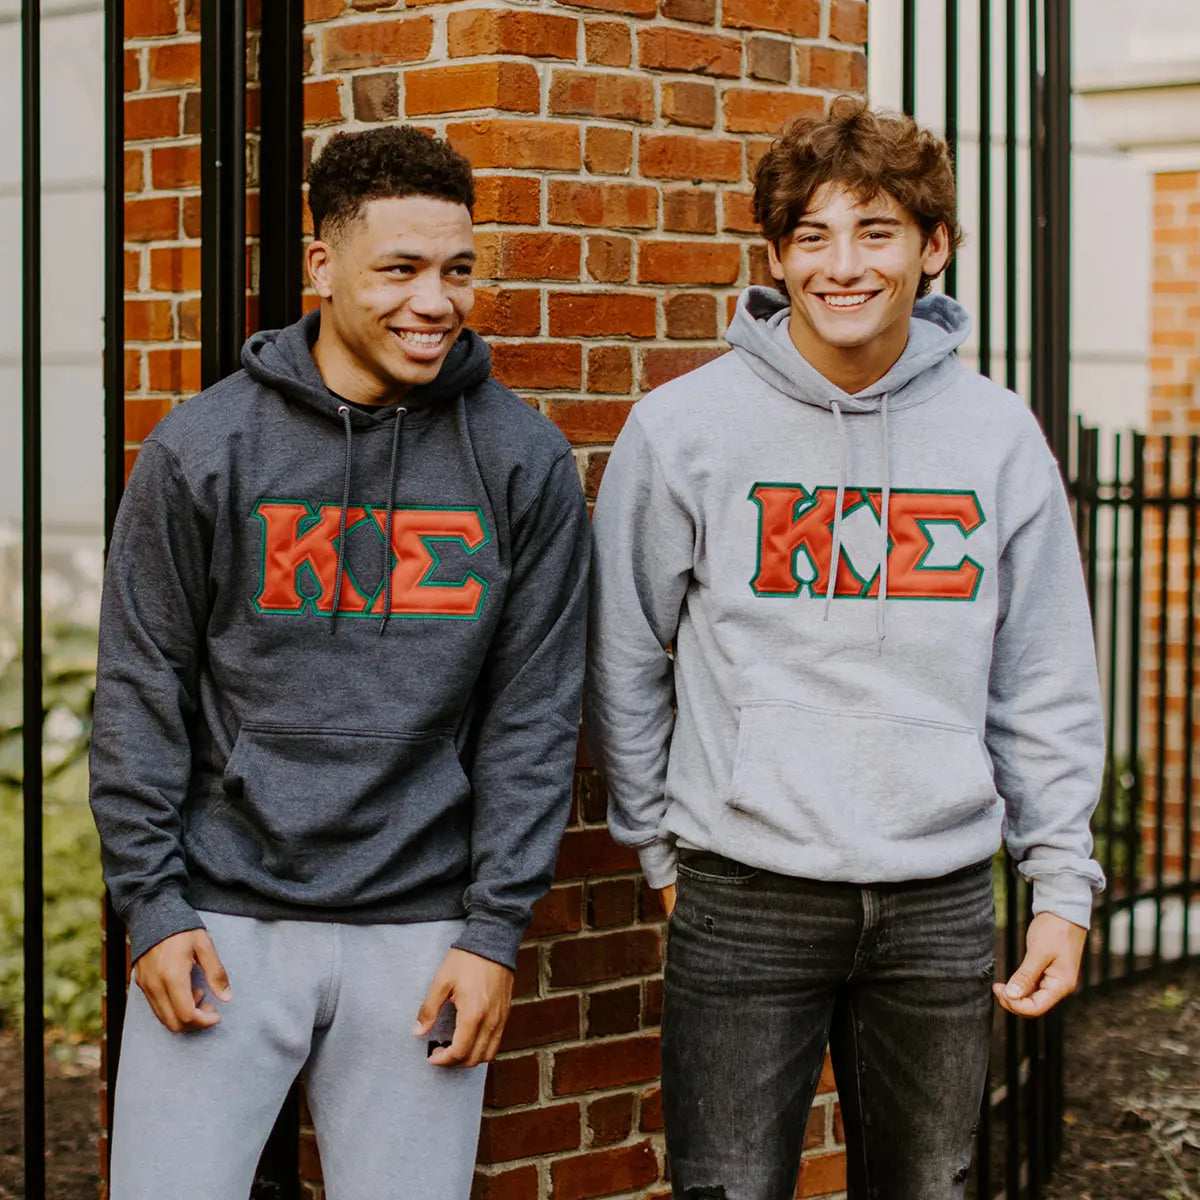 Heather Kappa Store Hoodie Kappa – Official Sig Sigma with Letters Gray On Sewn